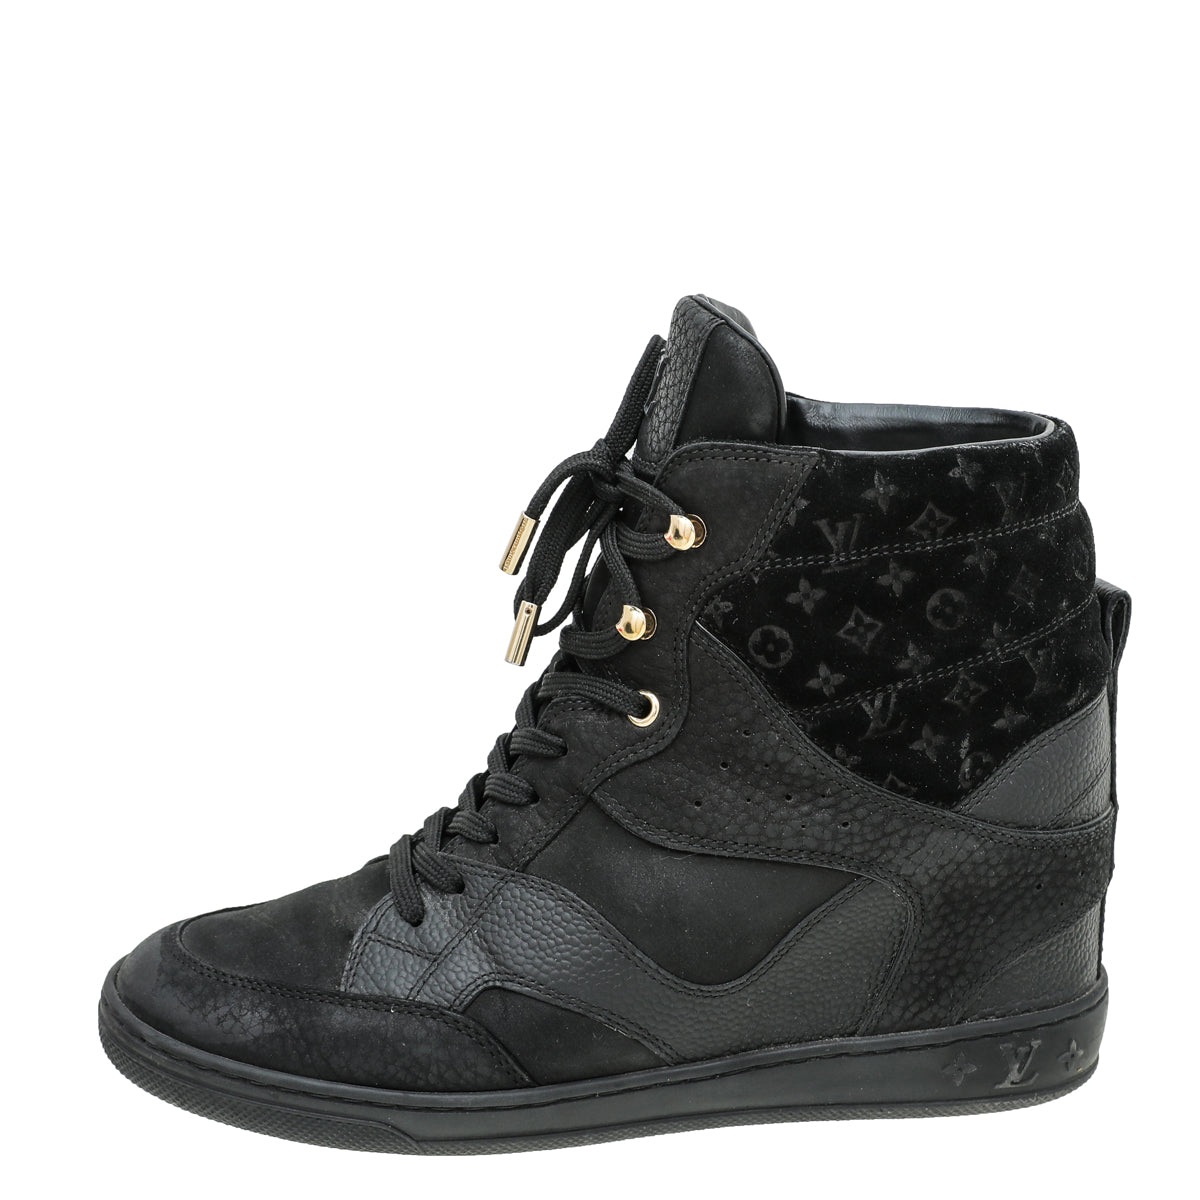 Louis Vuitton Black Suede High Top Wedge Sneakers 40.5 – The Closet